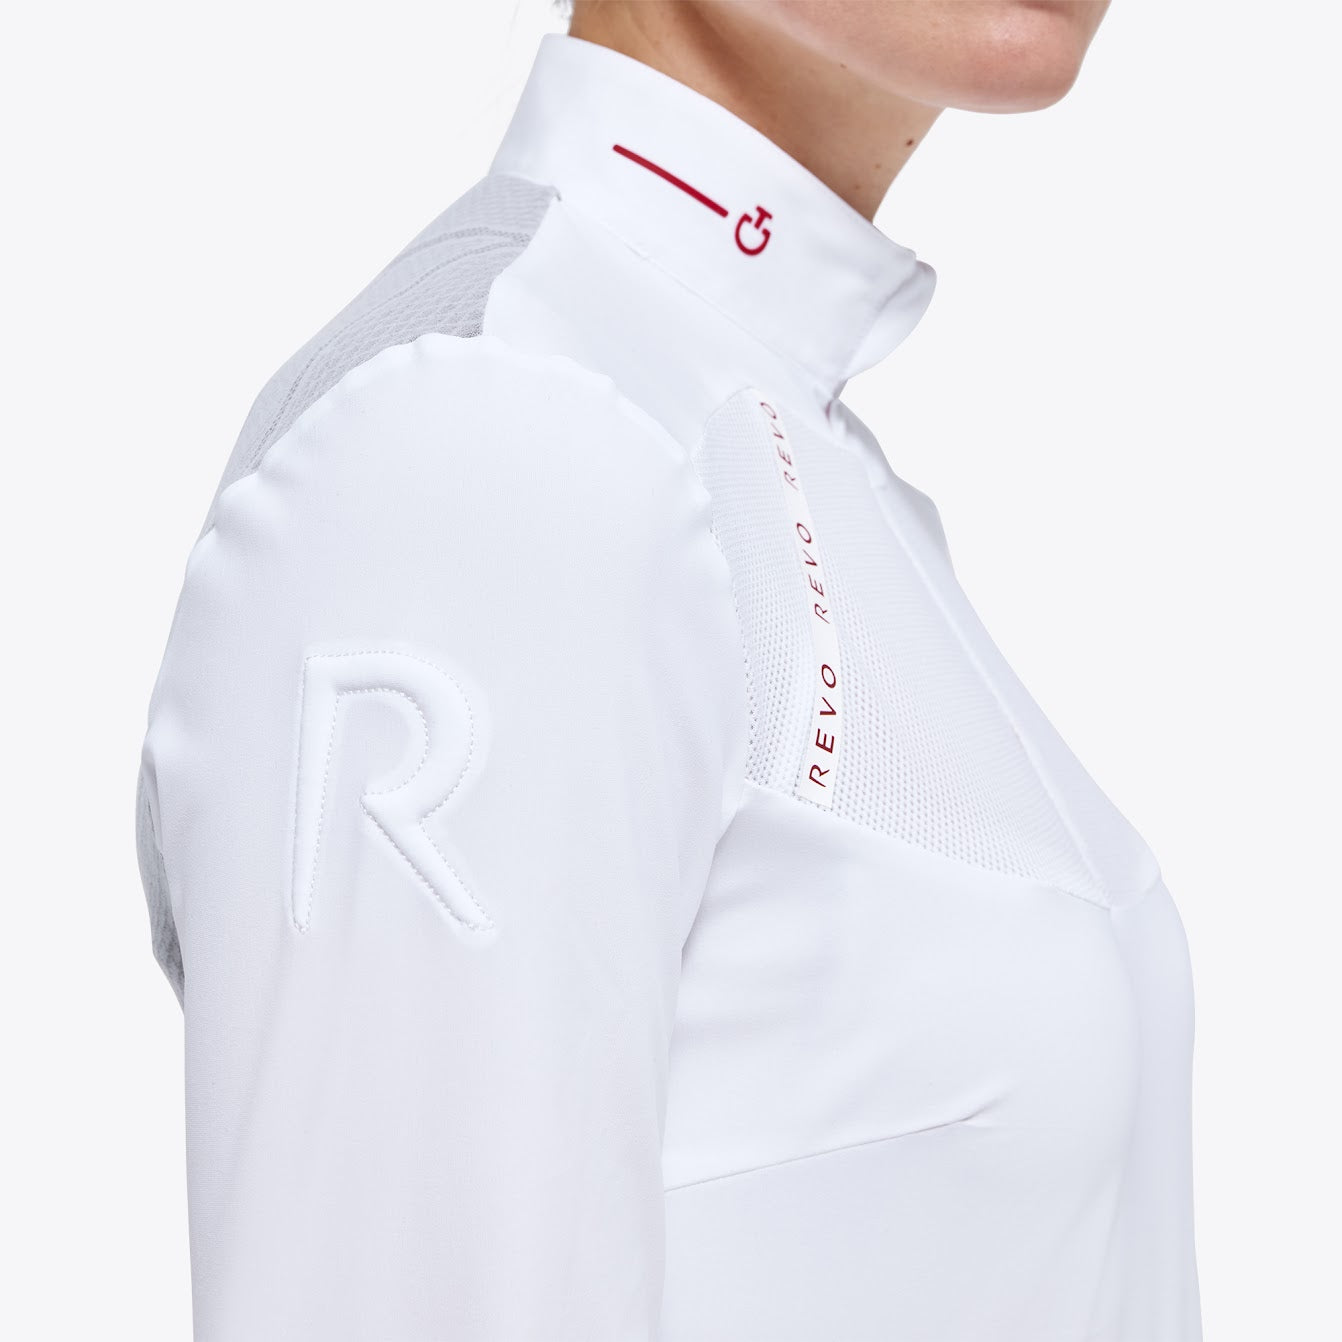 Cavalleria Toscana Revo Red Label Tech Knit Show Shirt has the iconic Revo jersey mesh back for maximum movement and comfort. Revo detailing in fed across the front with zip opening 